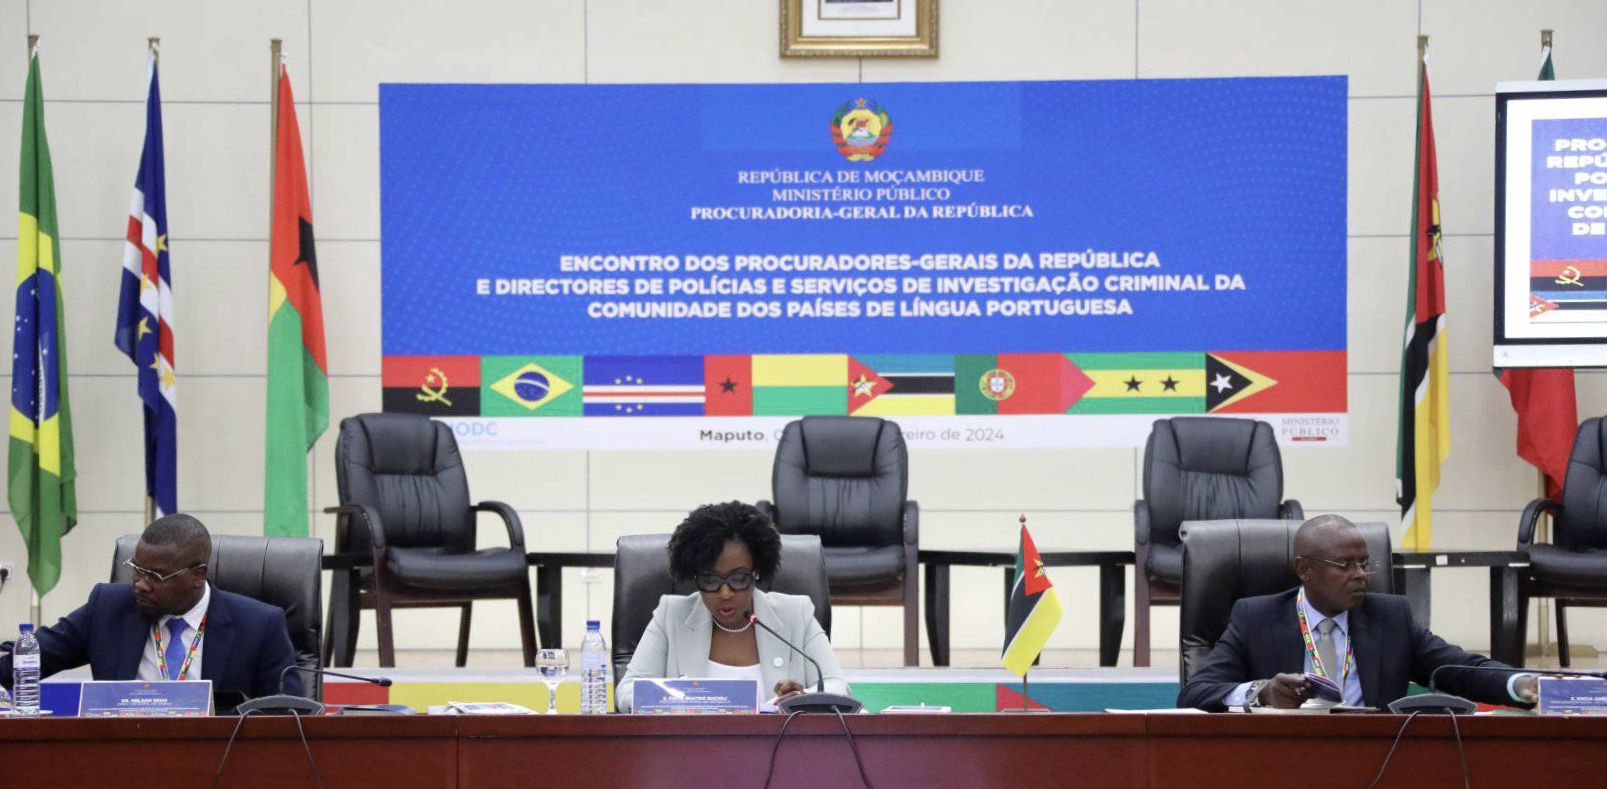 Portuguese-speaking countries renew commitment to strengthen cooperation against crime